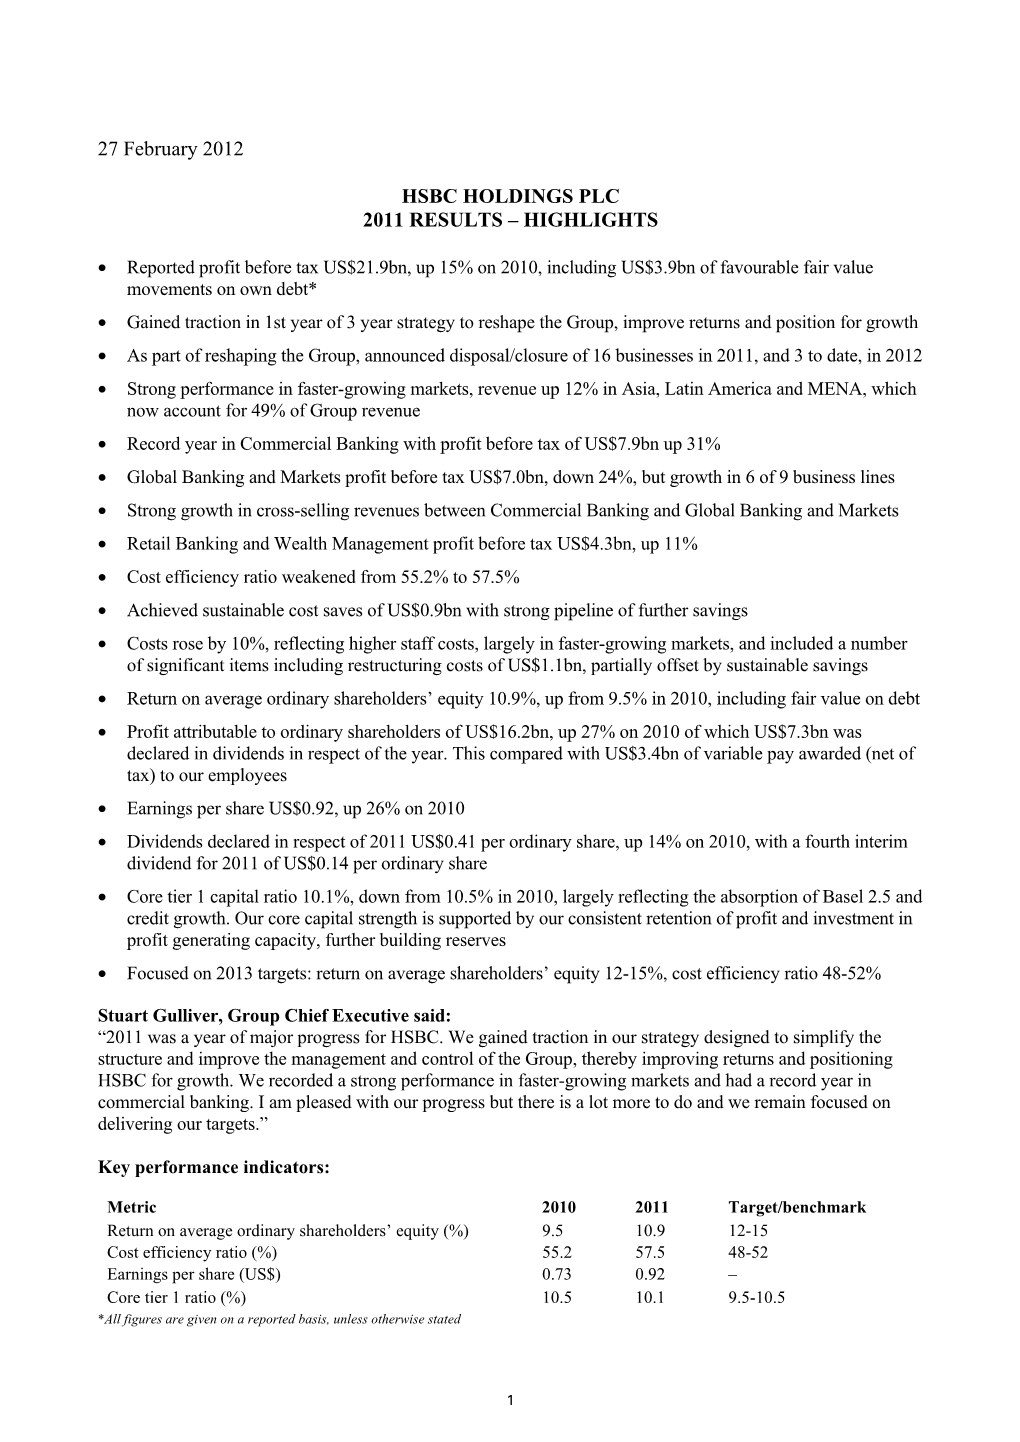 HSBC Holdings Plc Annual Results 2011 Media Release